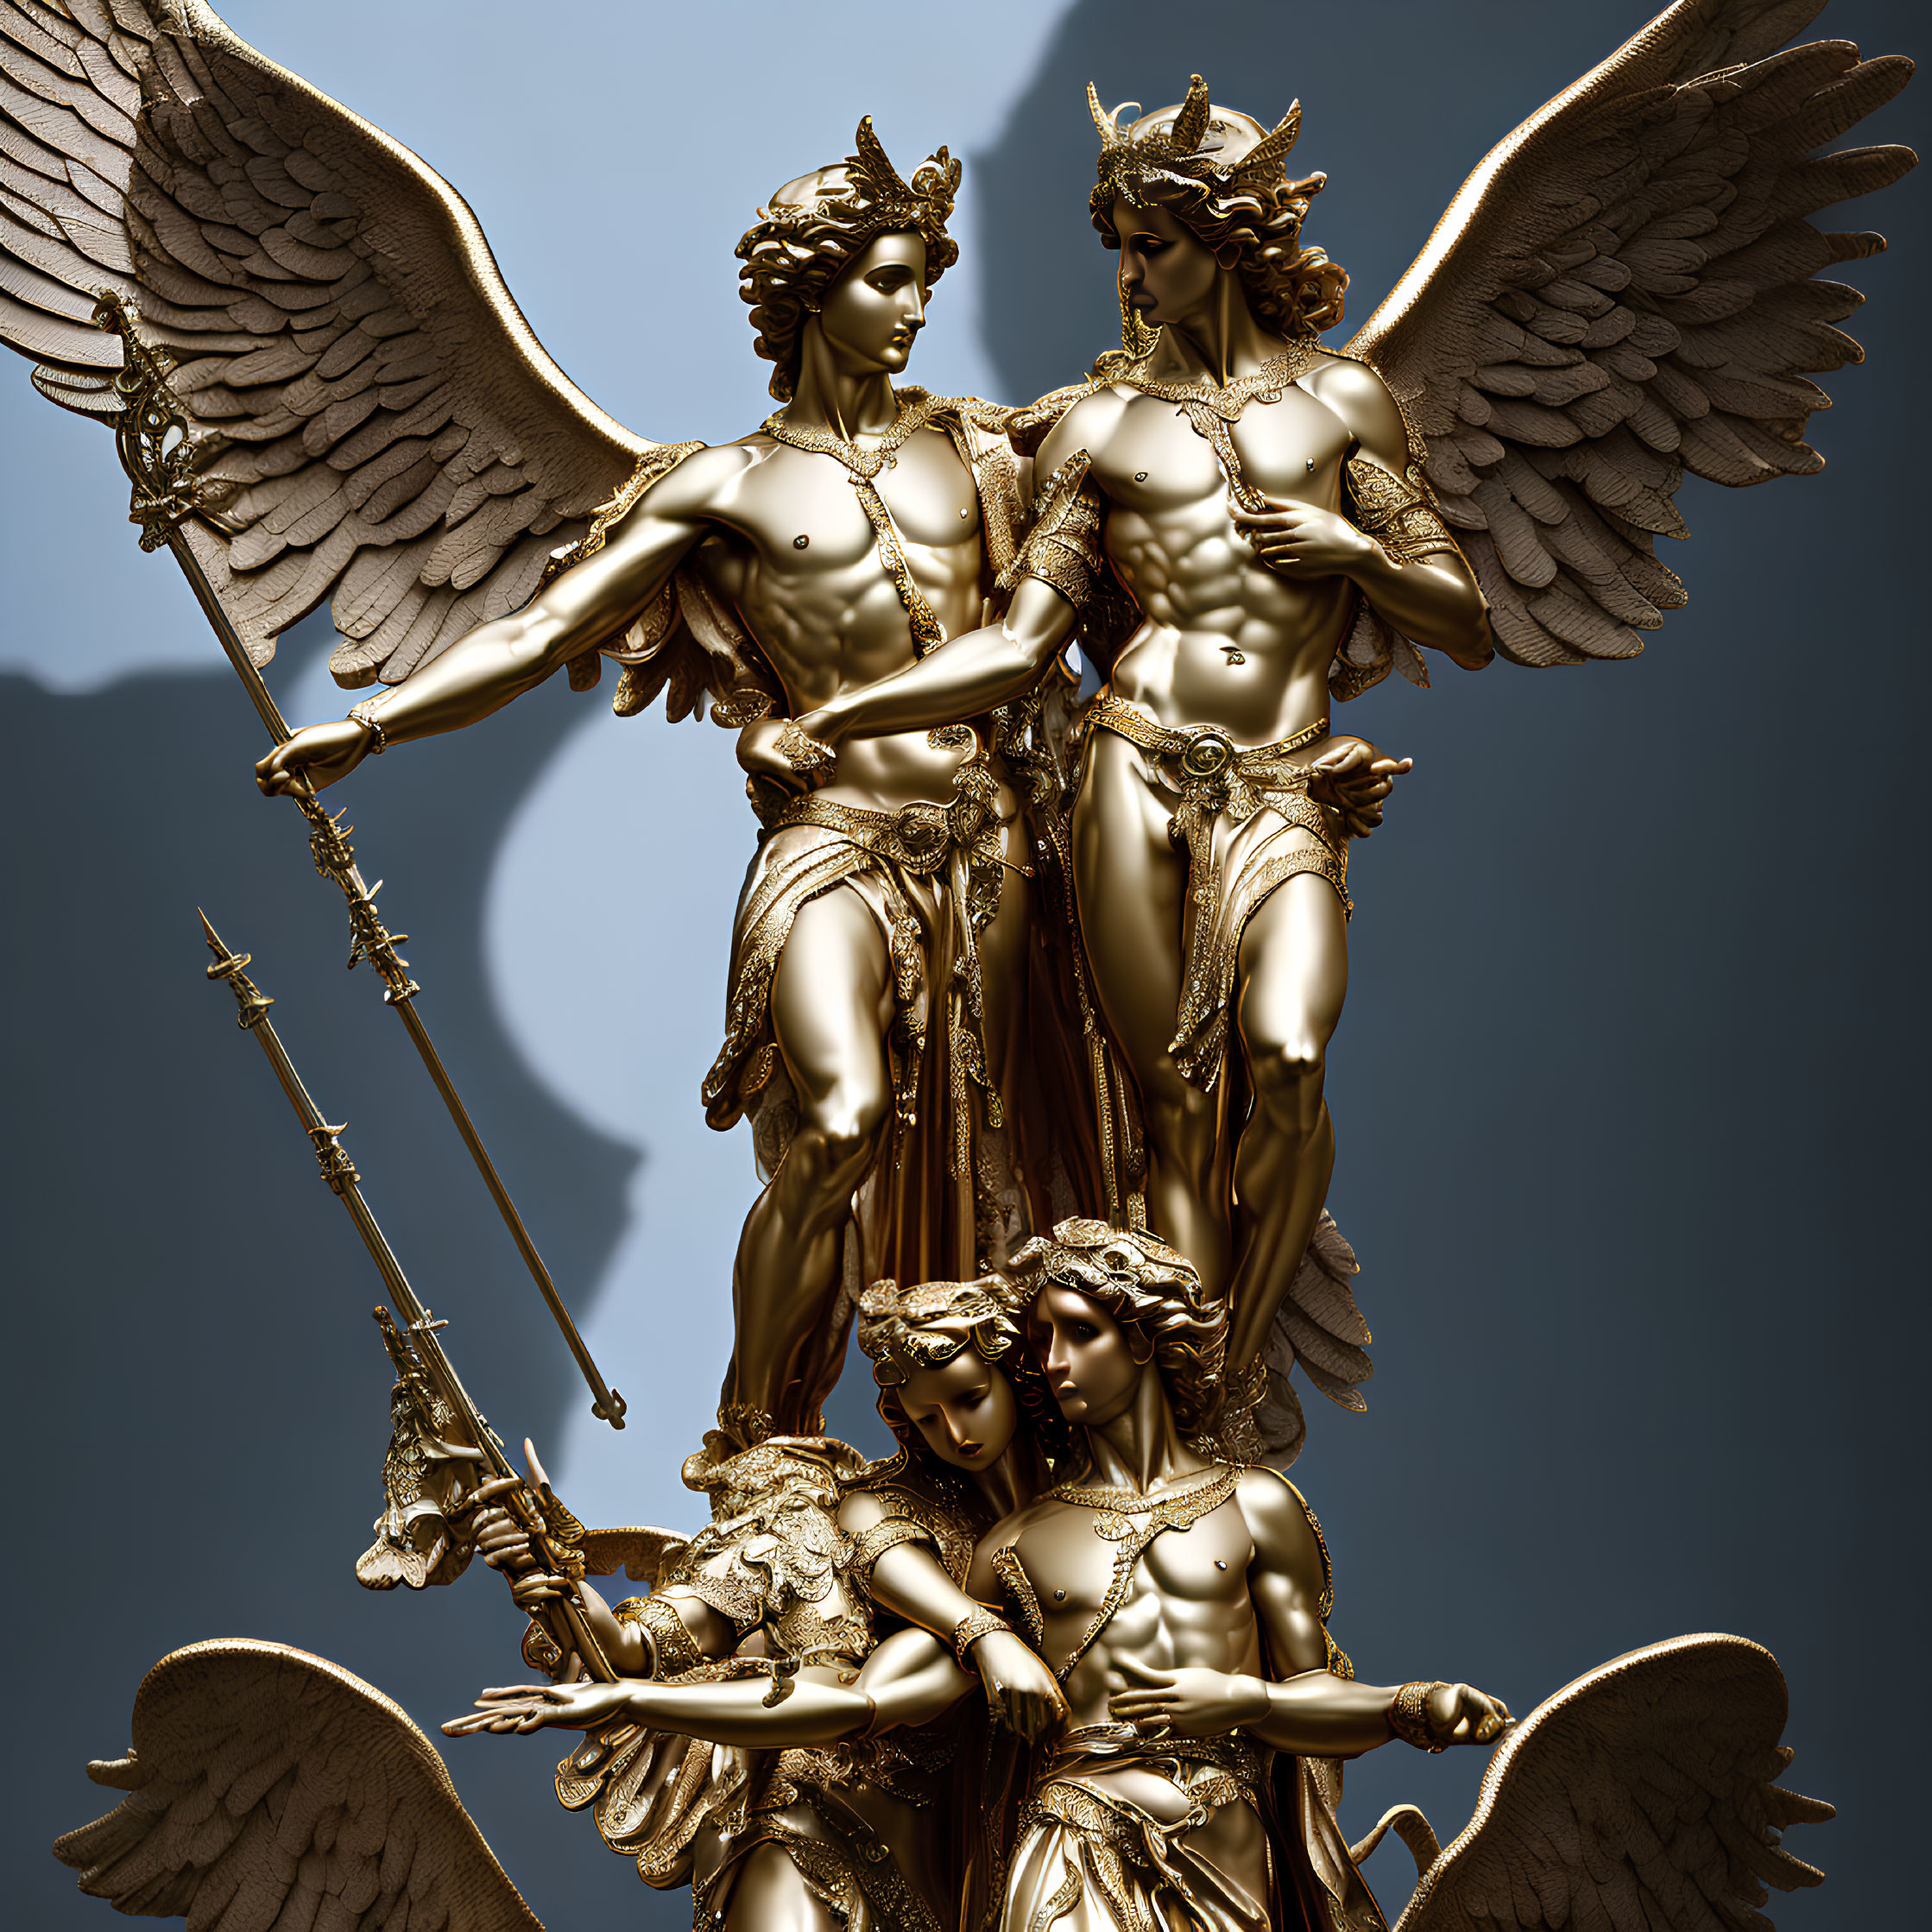 Intricate golden sculpture of three winged angels on blue background